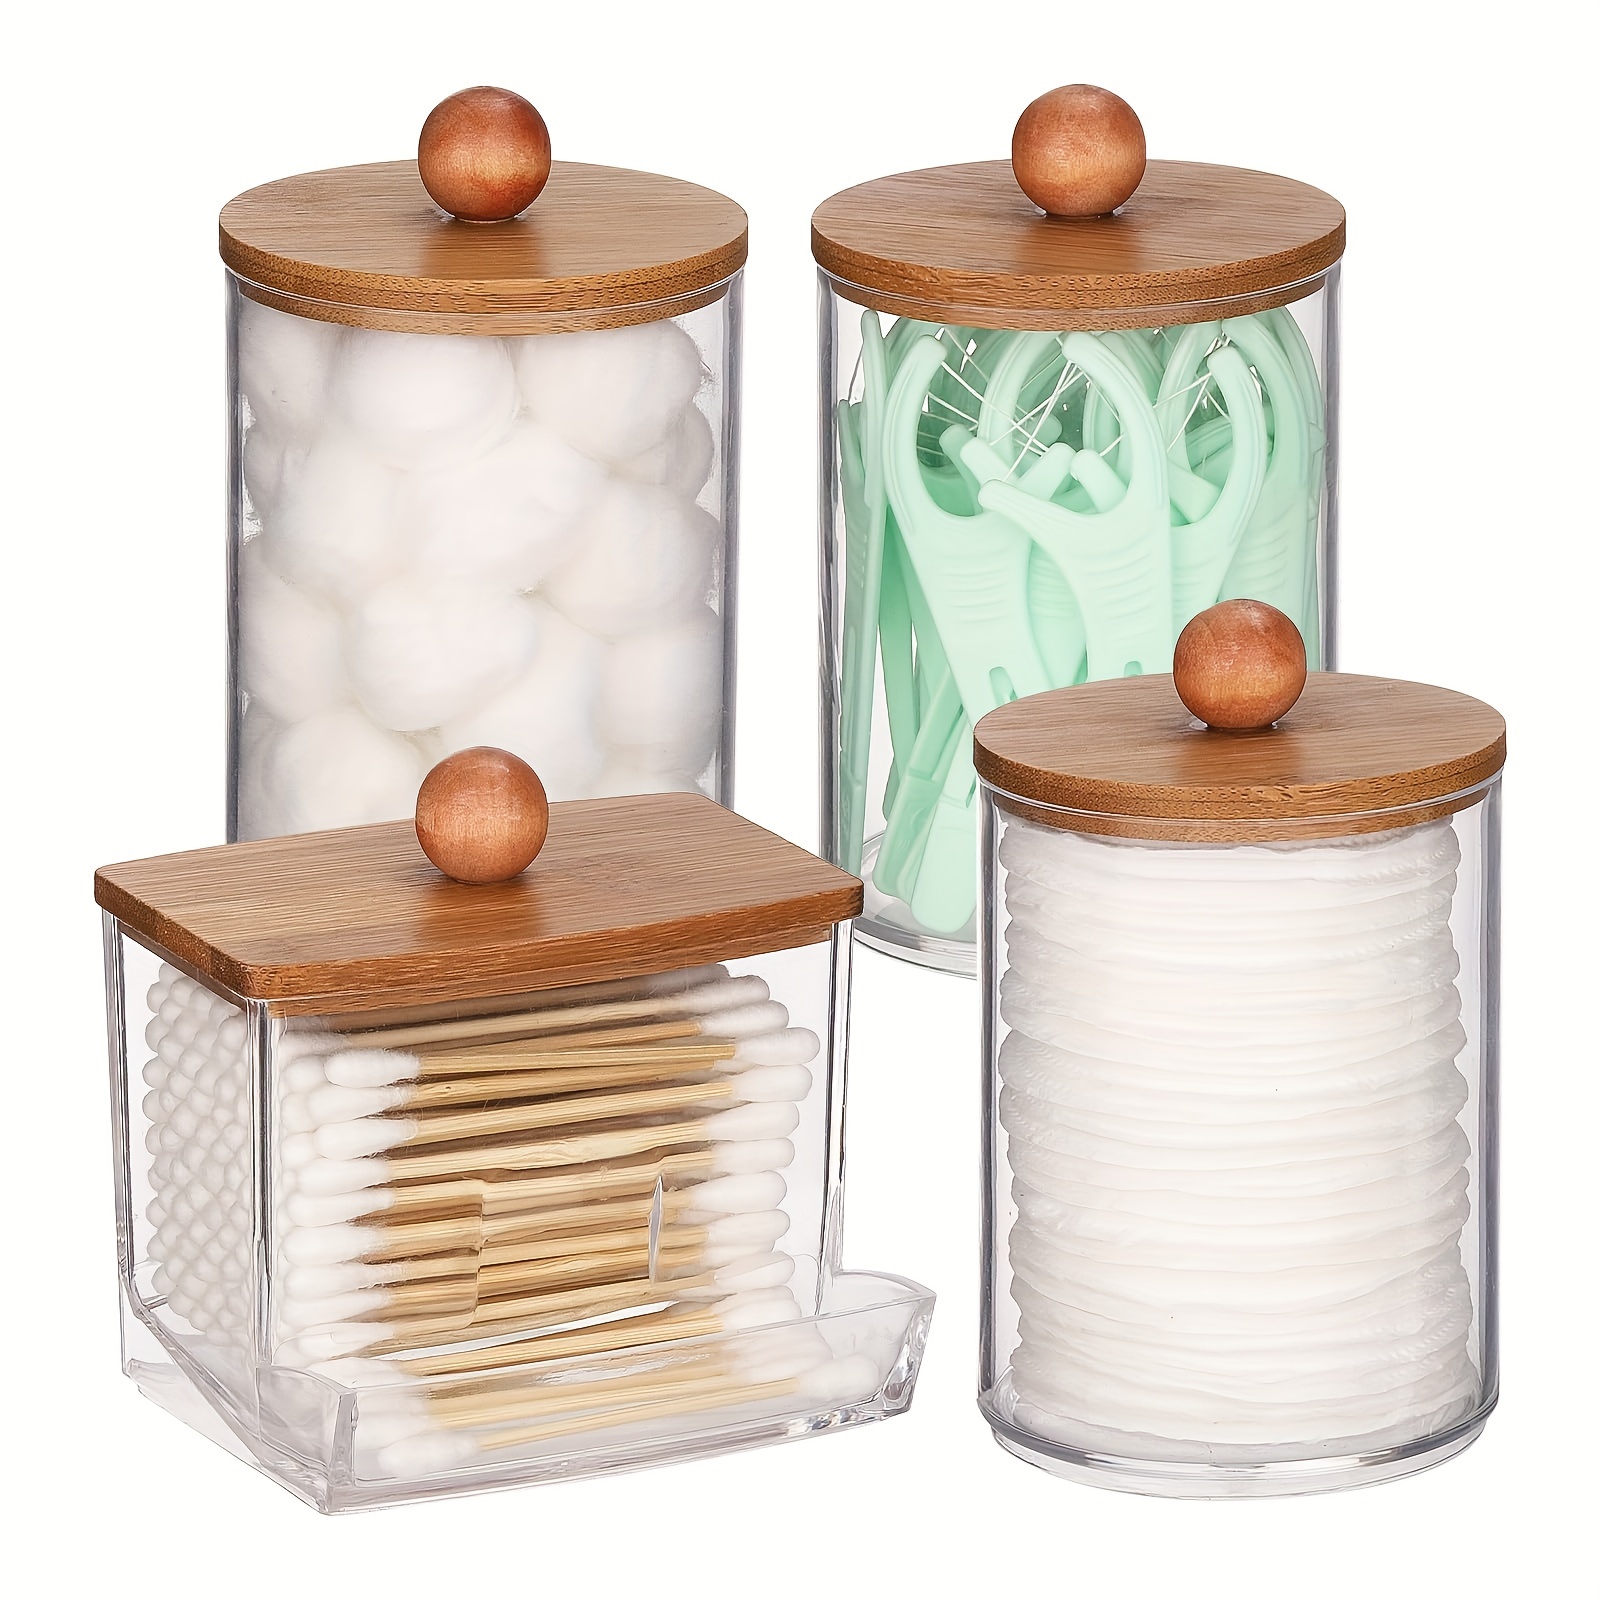 

Elegant Clear Apothecary Jar Set (1pc/4pcs) - Chic Bathroom Organizer For Cotton Balls & Swabs - 7/10 Oz Airtight Container With Lid - Perfect For Home Decor & Storage